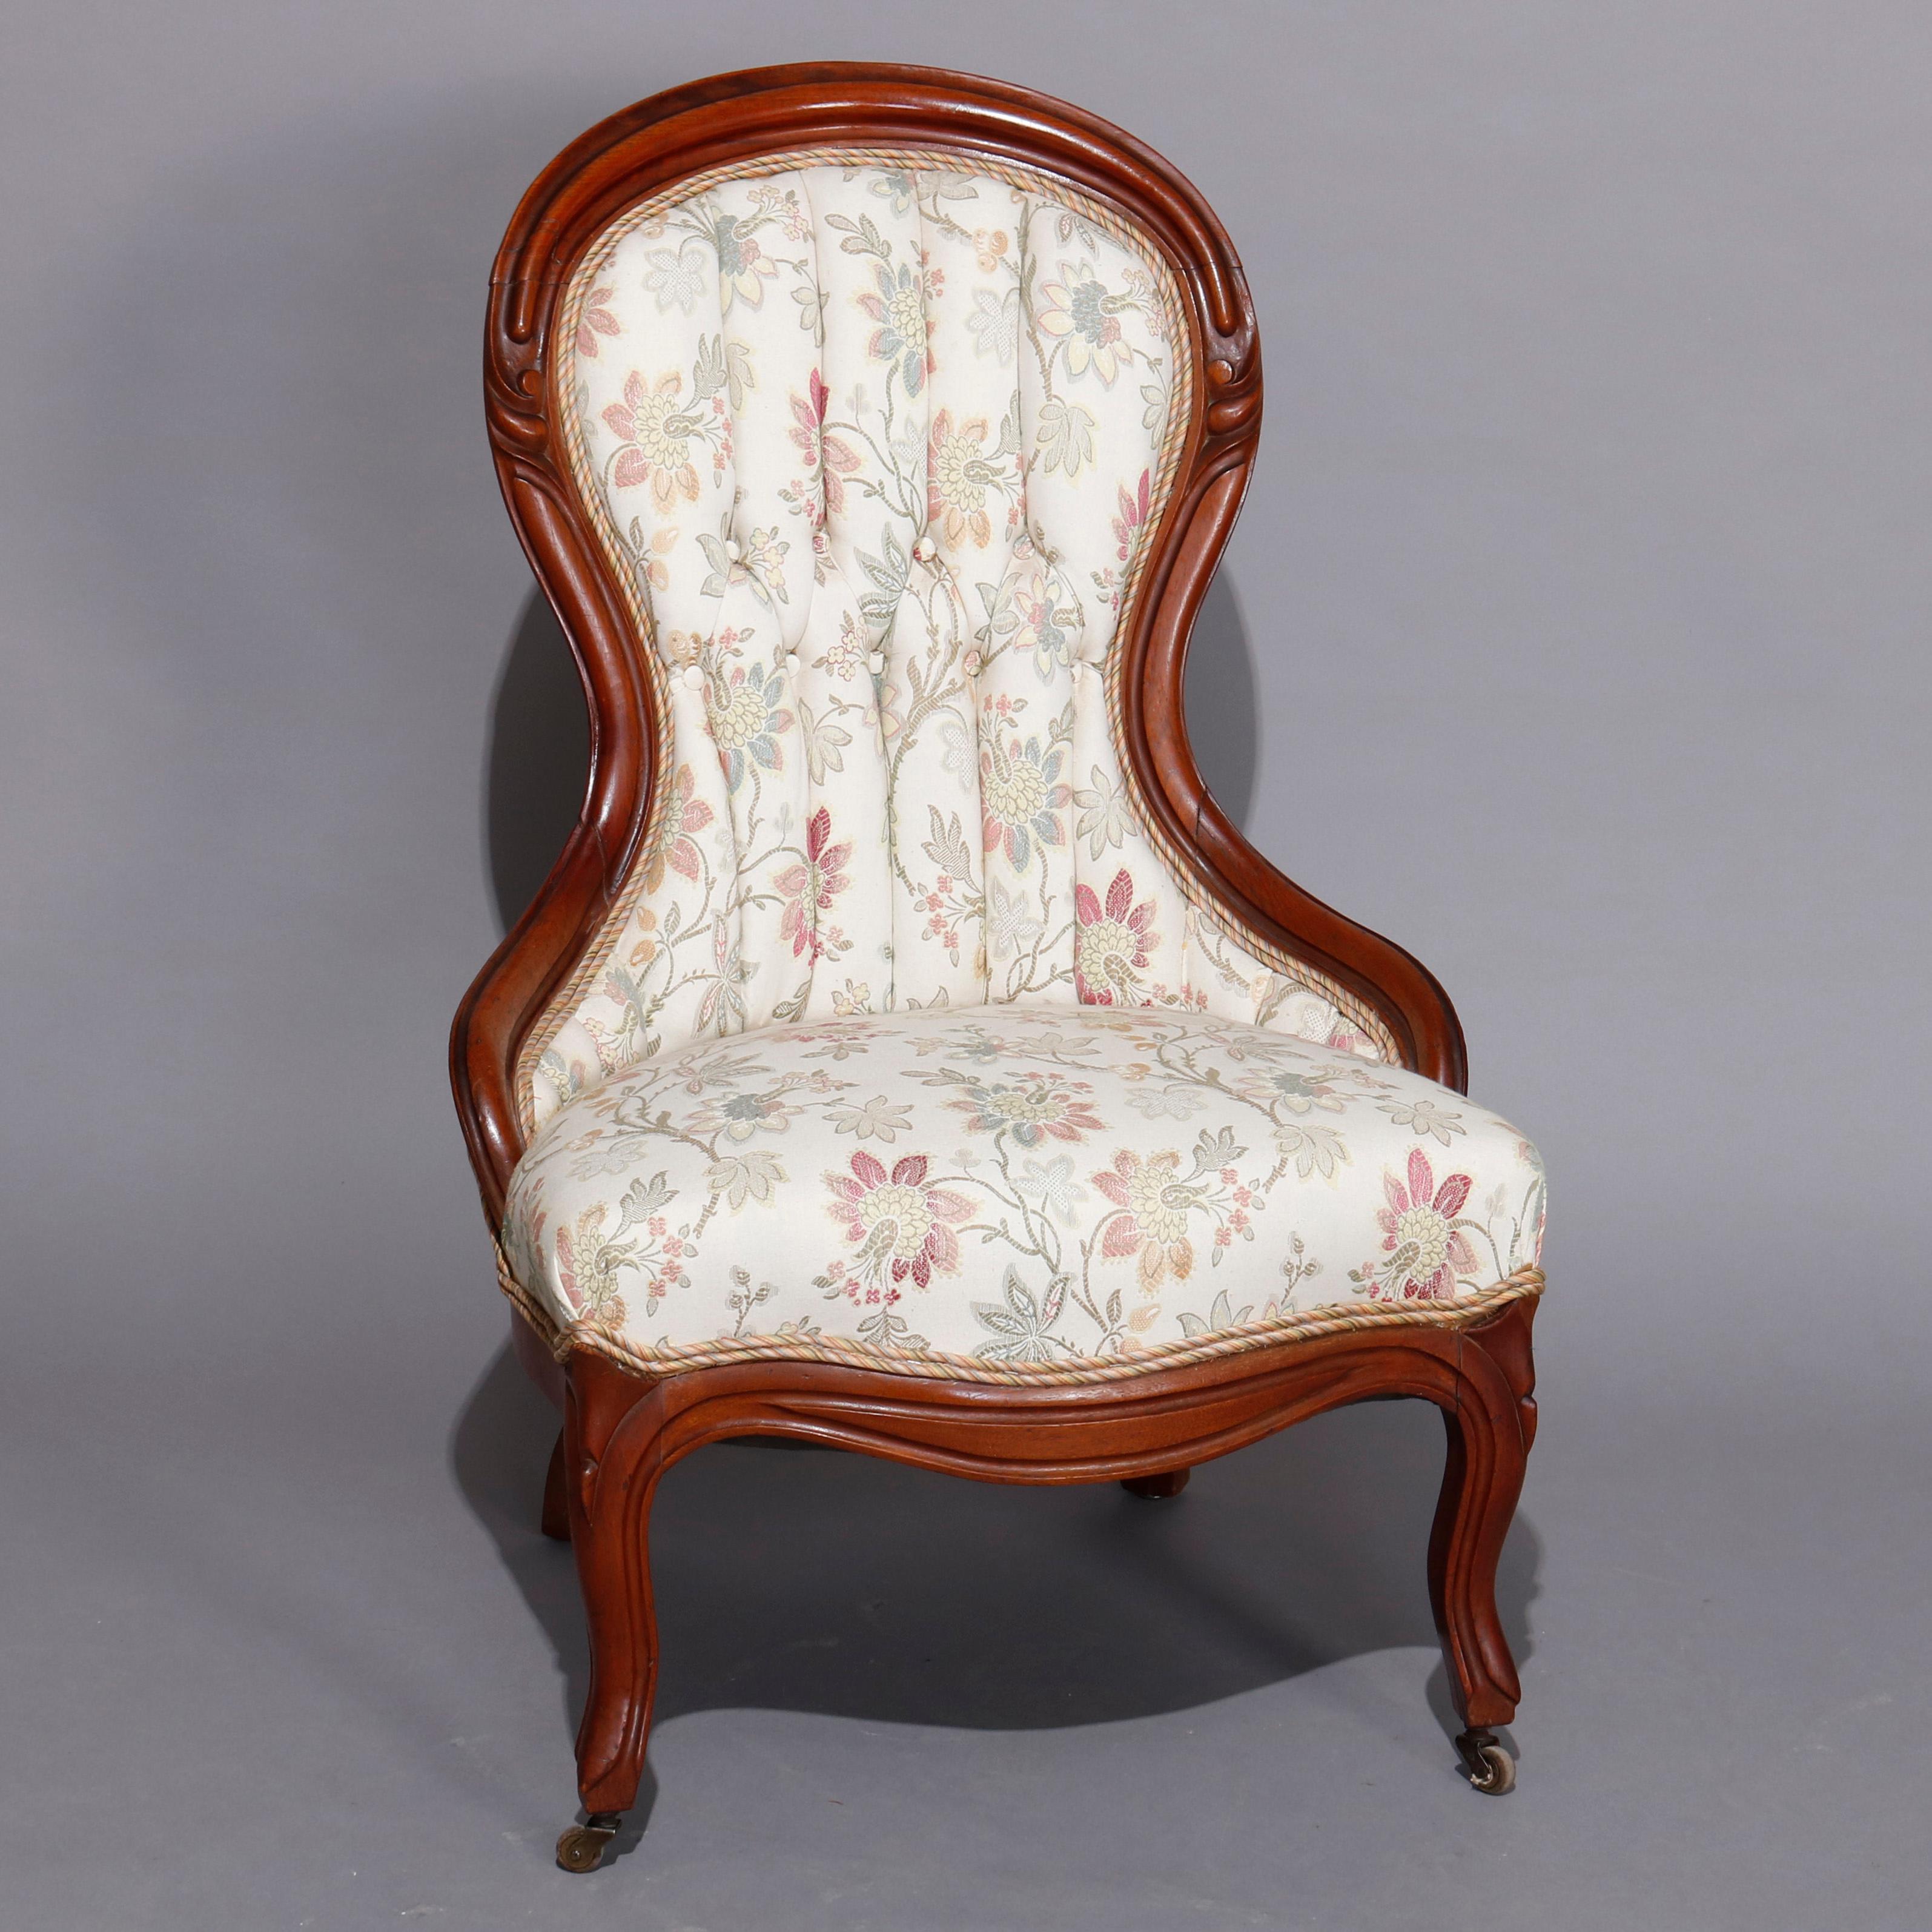 Upholstery Antique Victorian Carved Walnut Upholstered Parlor Chair Set, circa 1890